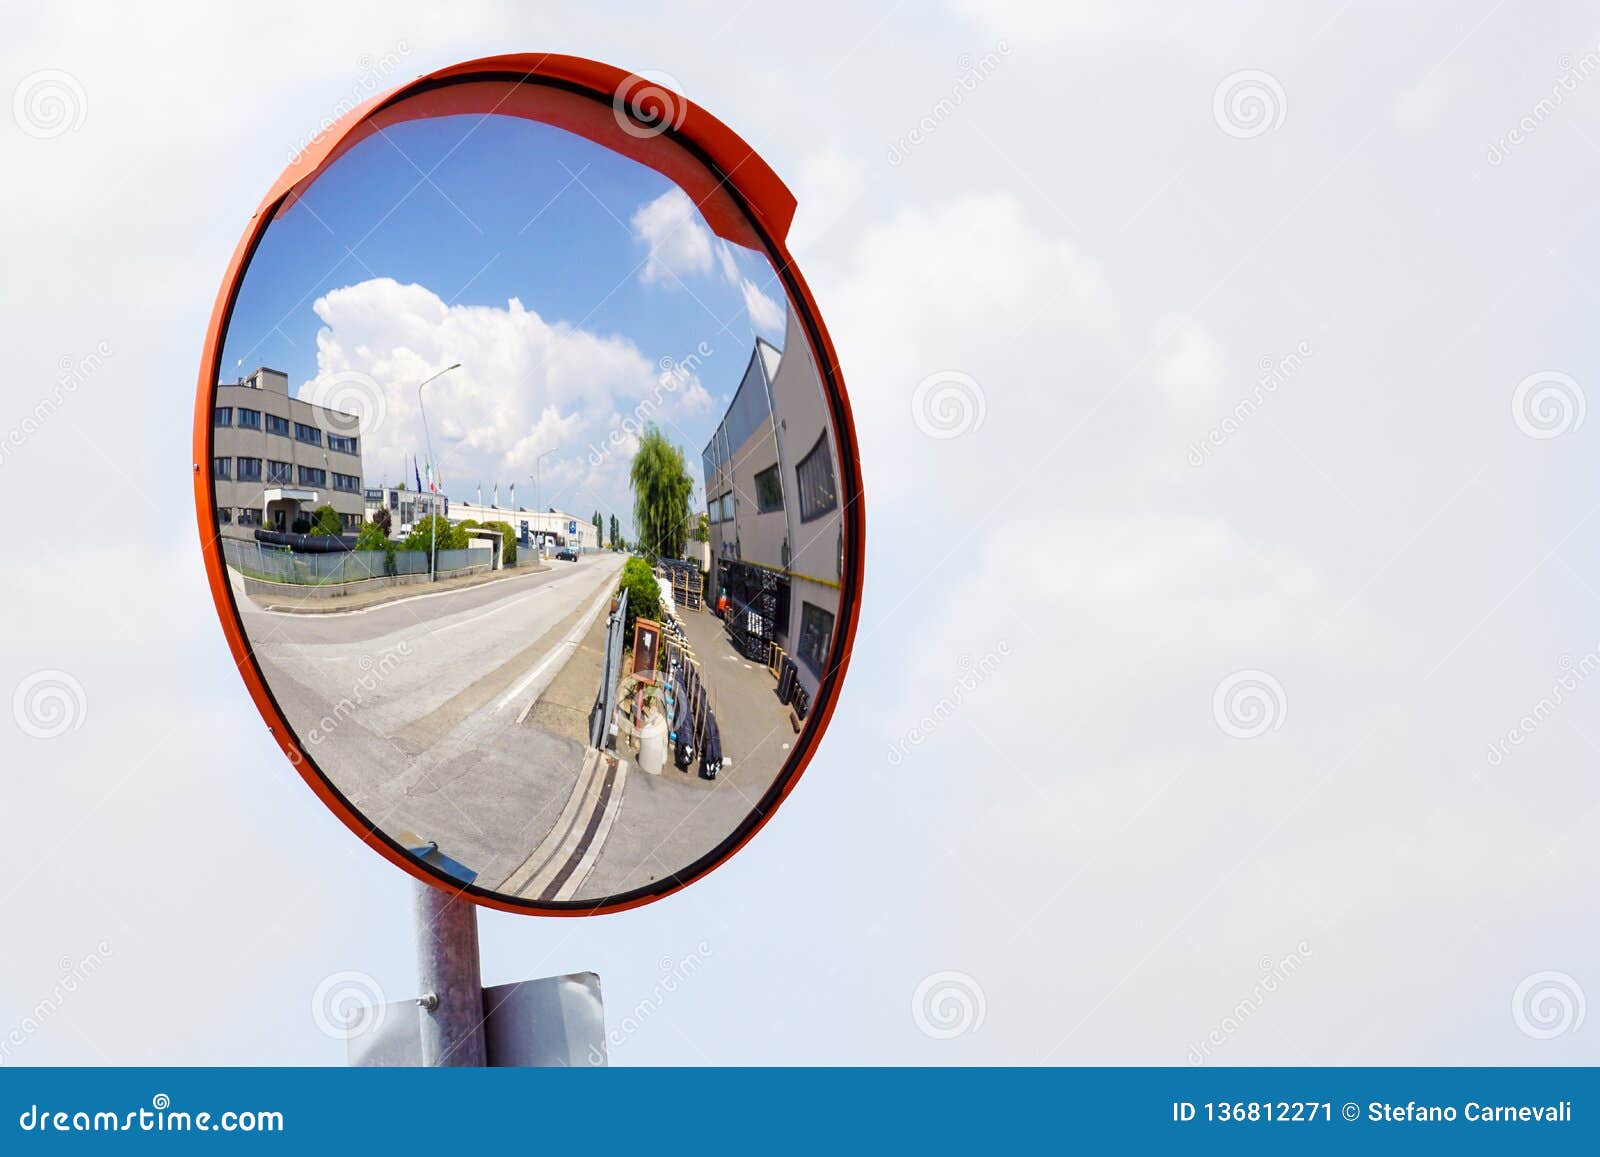 outdoor convex safety mirror hanging on wall with reflection of an urban roadside view of cars parked along the street